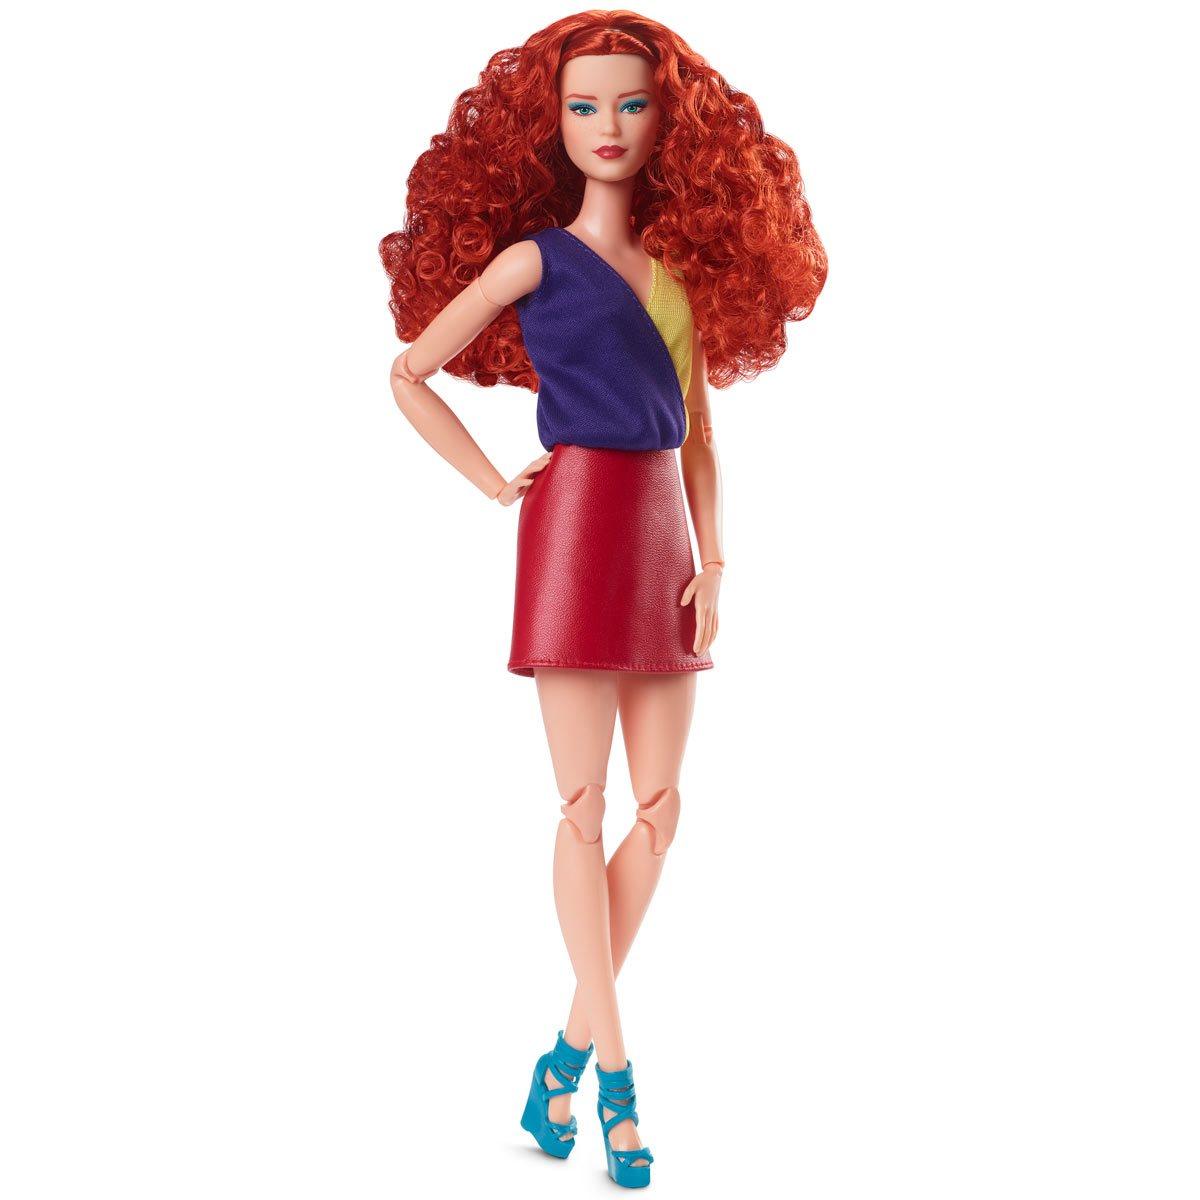 Barbie Looks Doll #13 with Red Hair Style and Pose, Fashion Collectibles - BumbleToys - 5-7 Years, Barbie, collectible, collectors, Fashion Dolls & Accessories, Girls, Pre-Order